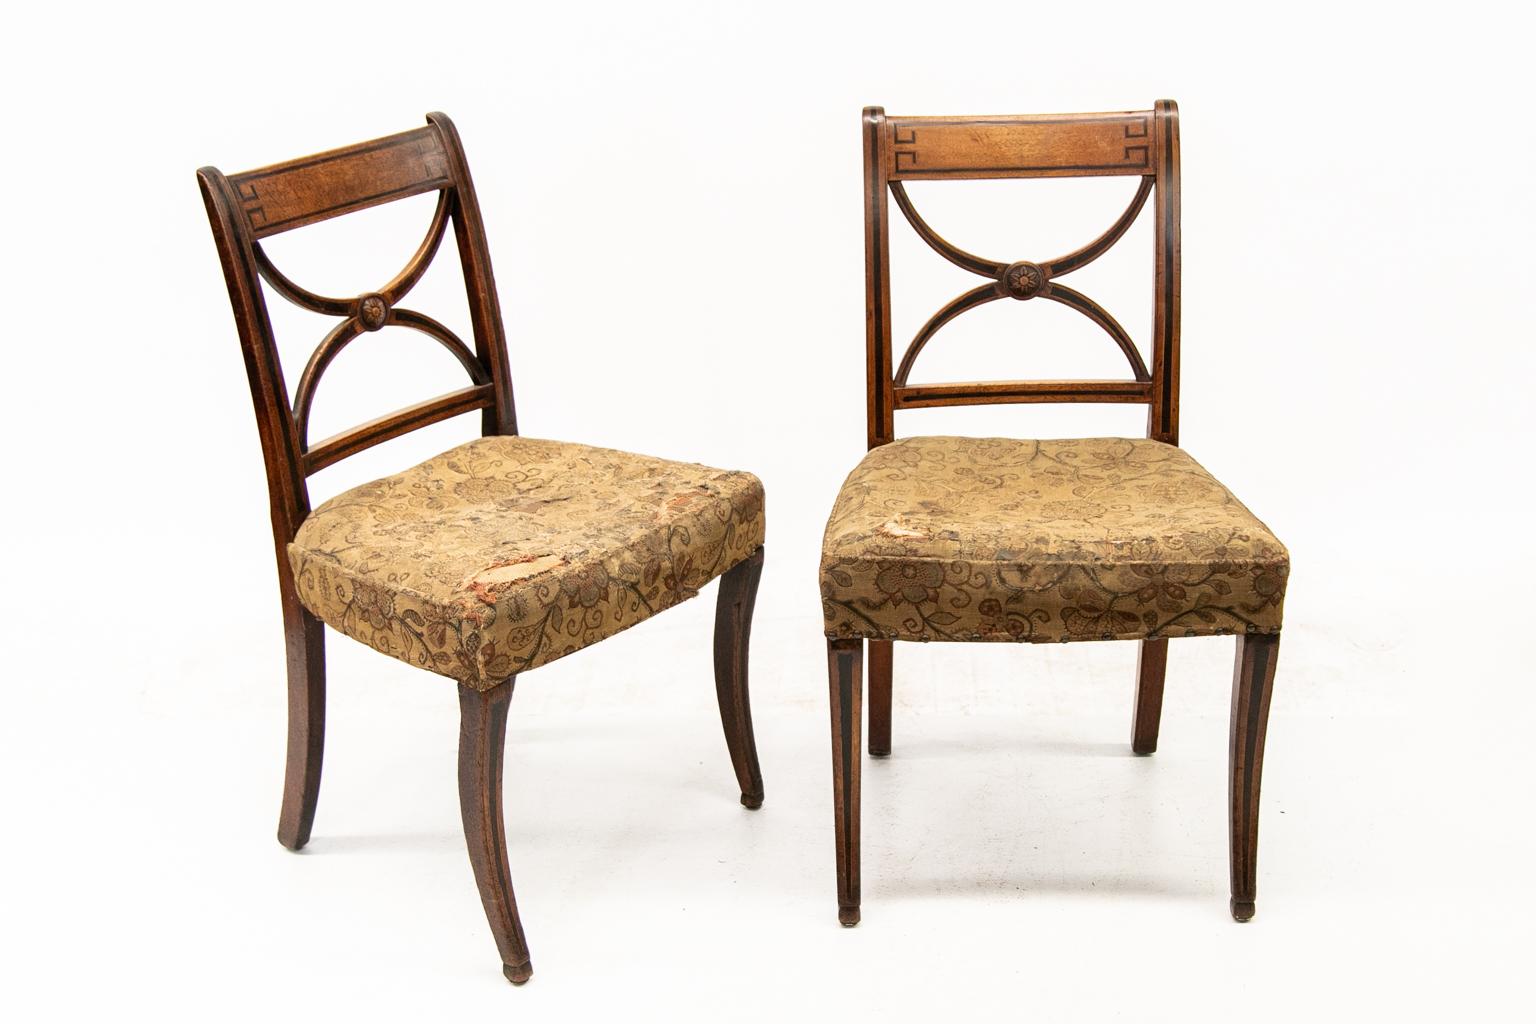 Pair of English Regency side chairs are made of mahogany and are inlaid with ebony line and boxwood inlay surrounding rosewood banding. The center of the splat has a carved floral medallion. There is a tapered rosewood inlay in the legs and